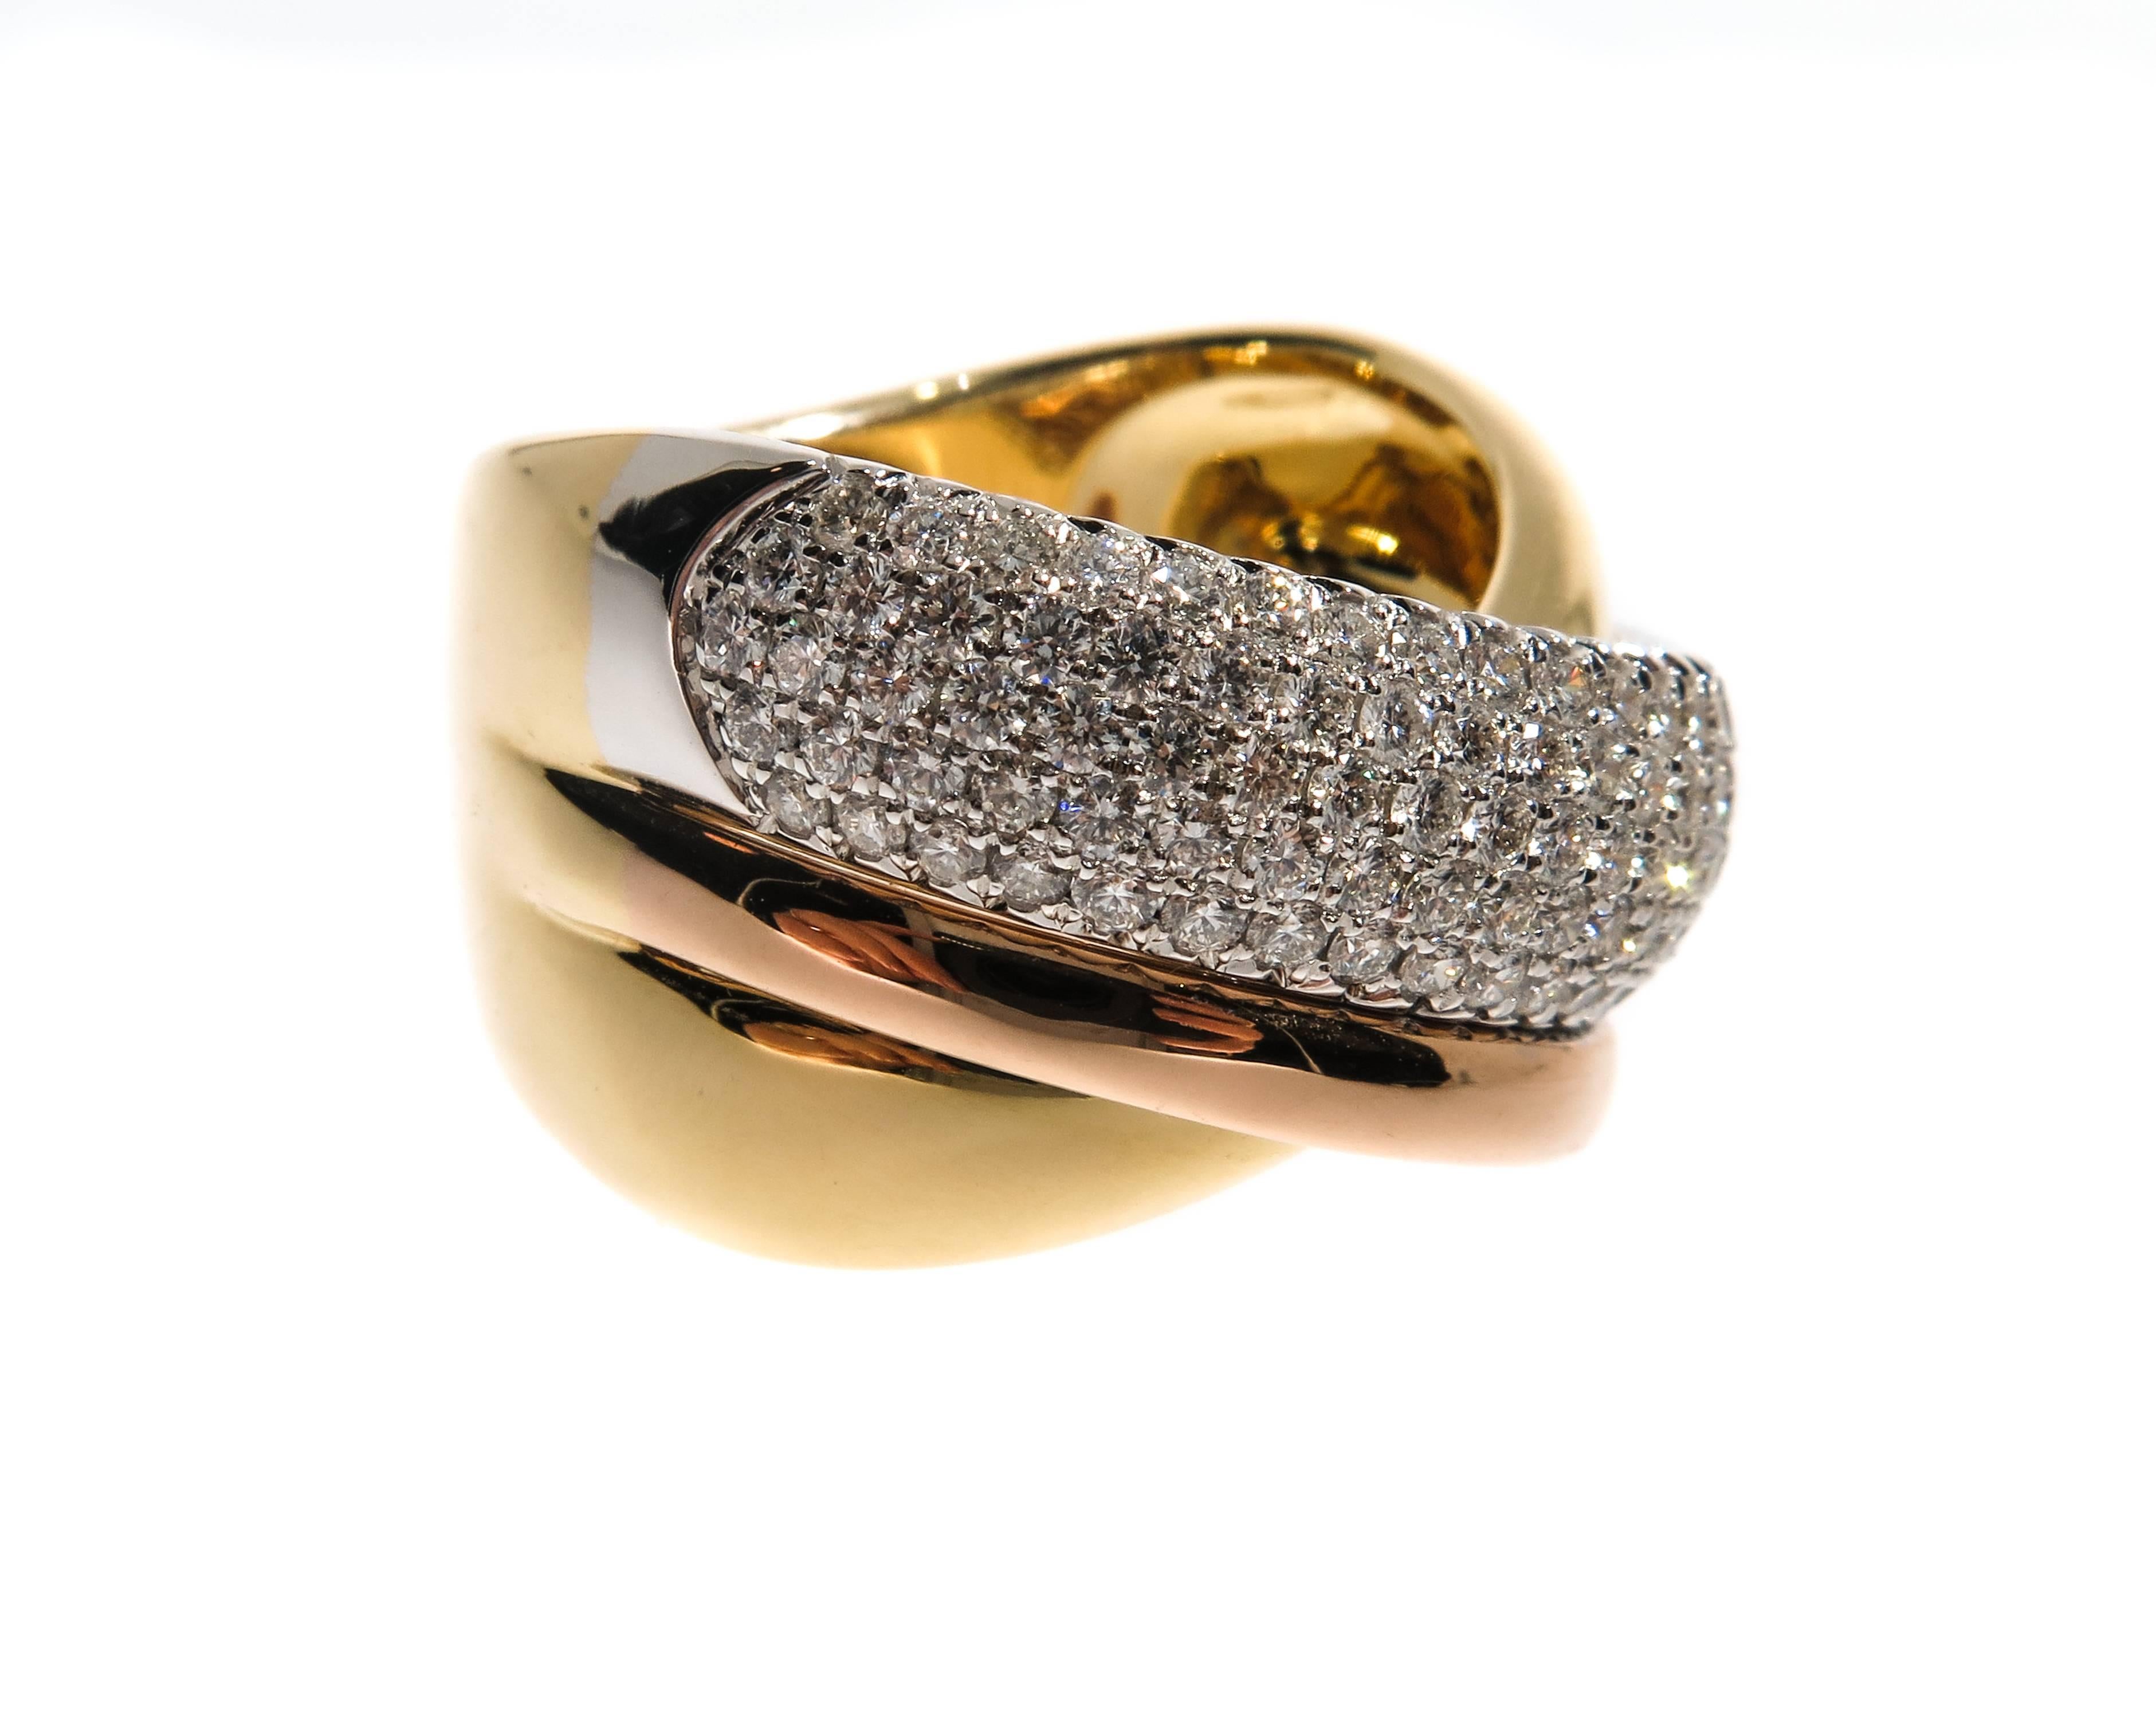 The attention to detail in this dramatic creation,  and the unrelenting pursuit of perfection is what sets our ring designs apart from the pack. Expertly crafted in 18k gold combining yellow, rose and featuring as main focus a white gold perfectly